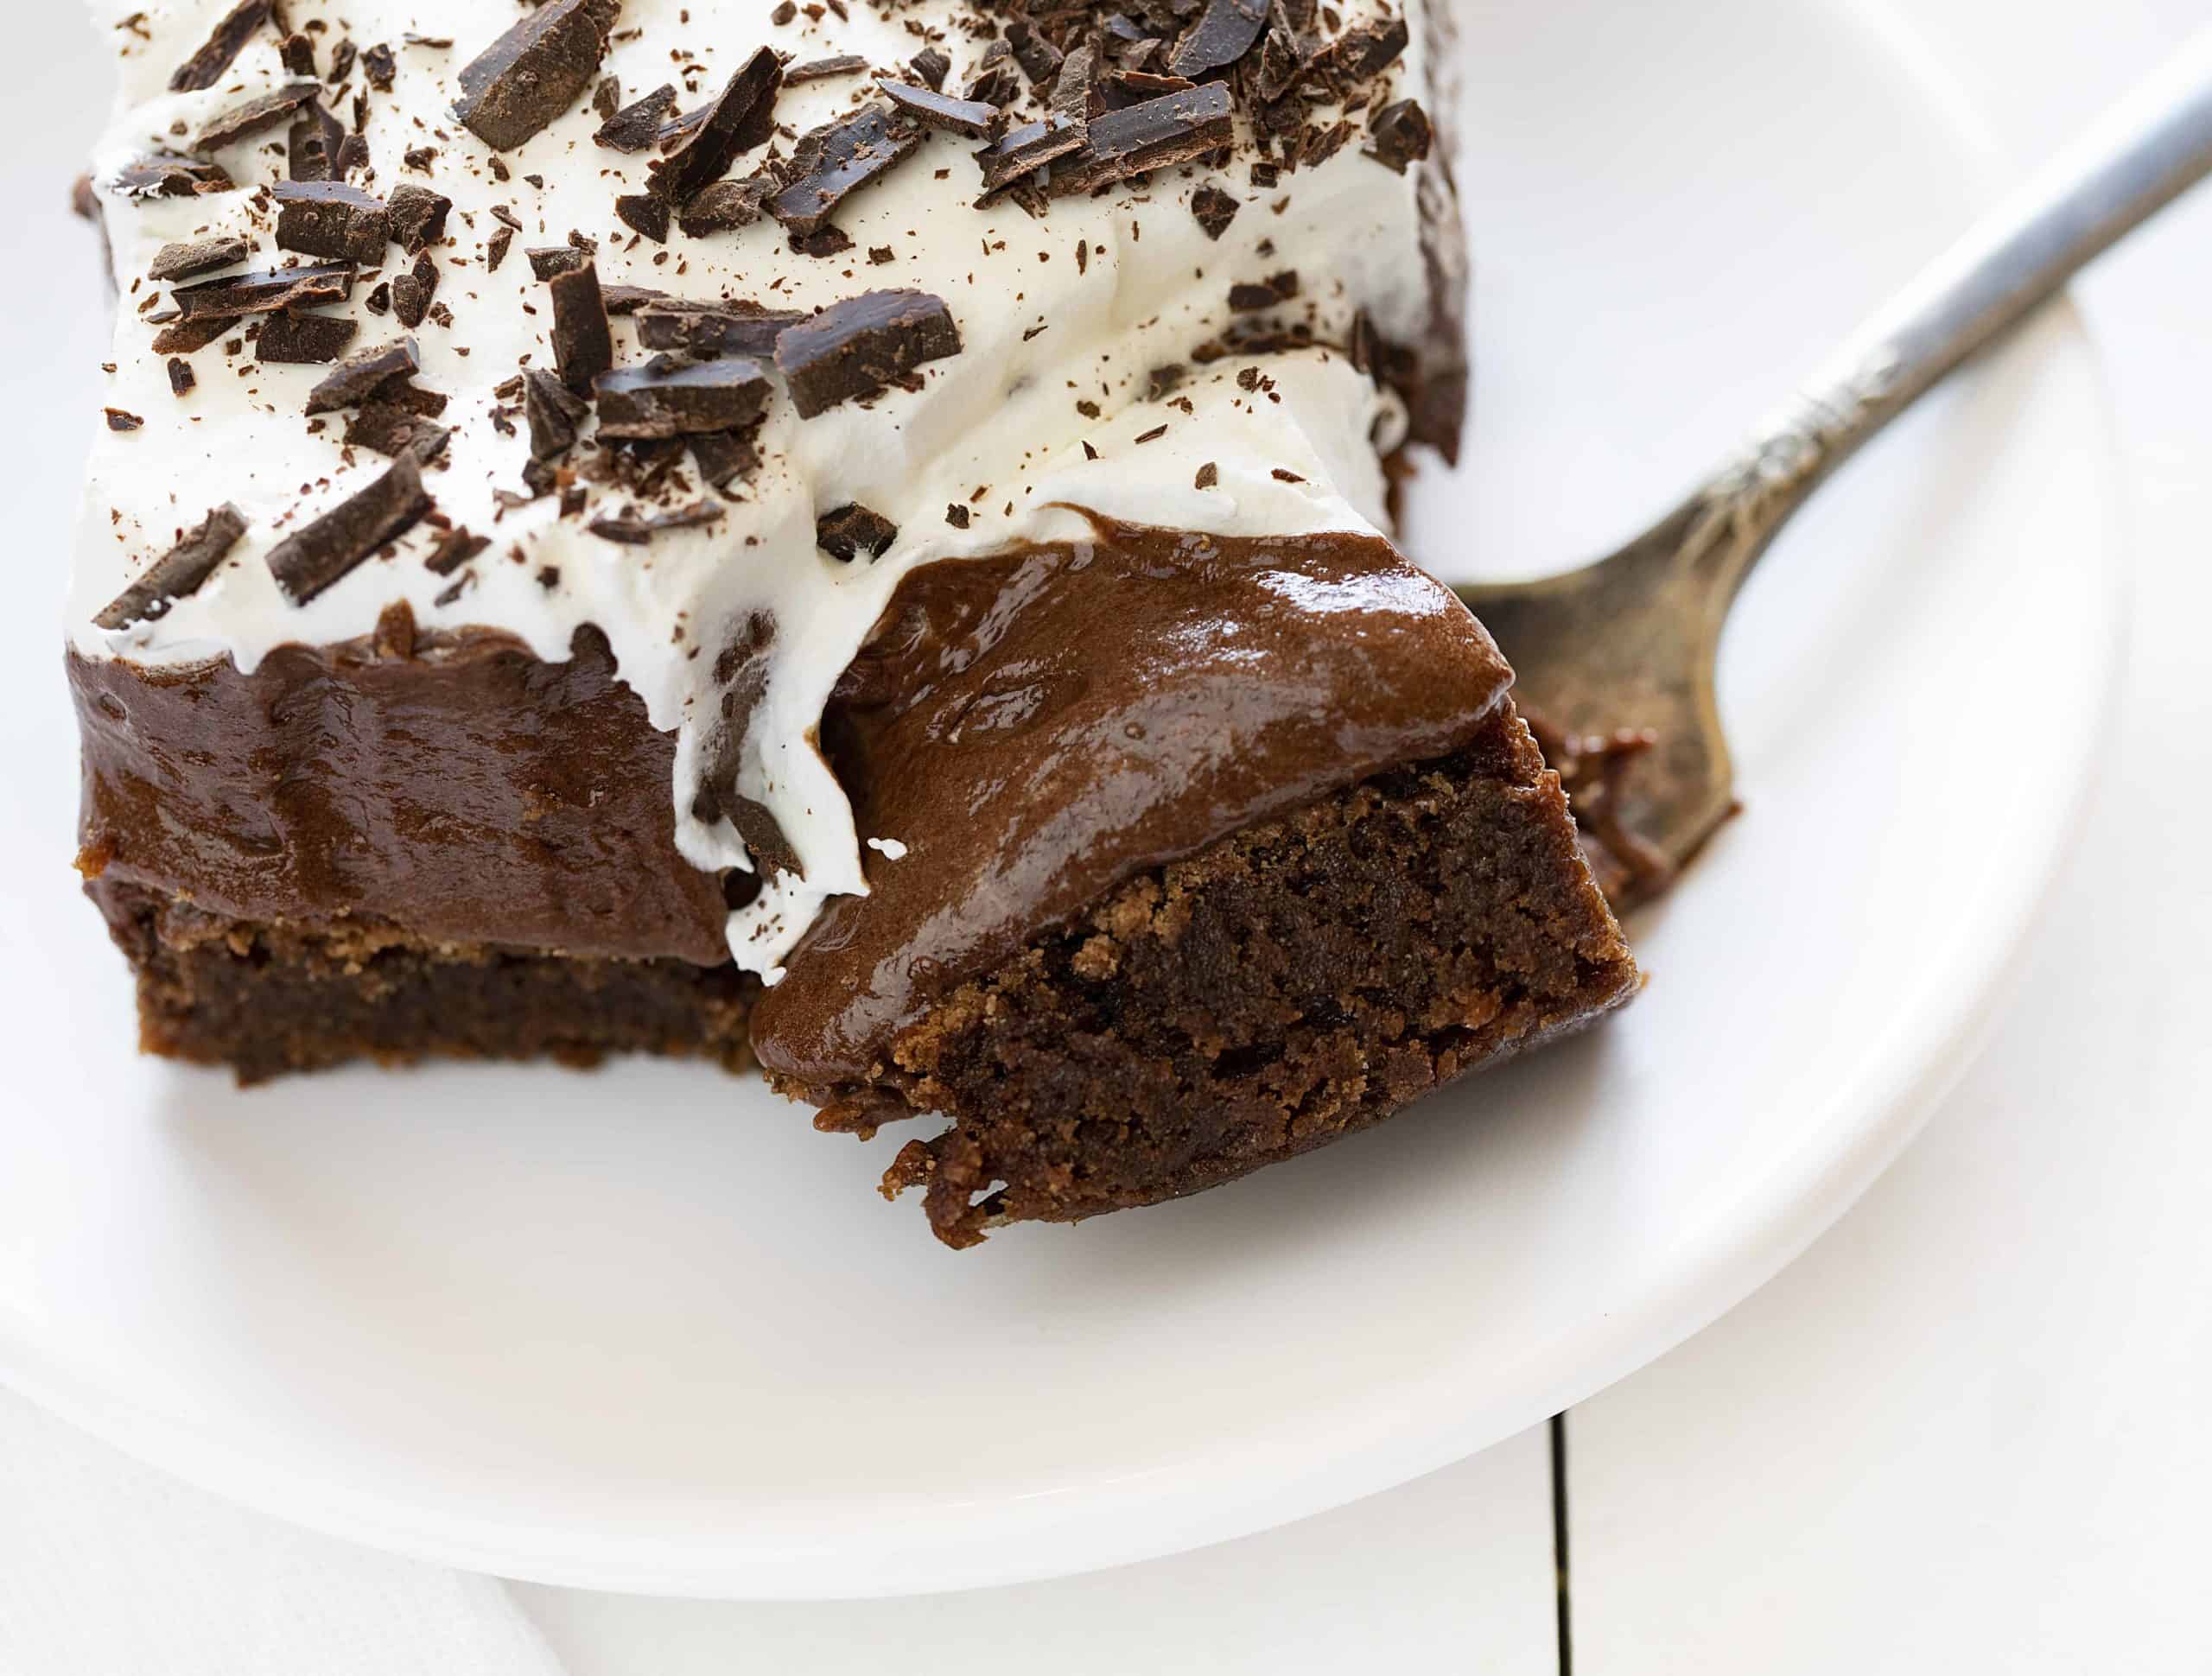 How to Make French Silk Brownies From Scratch